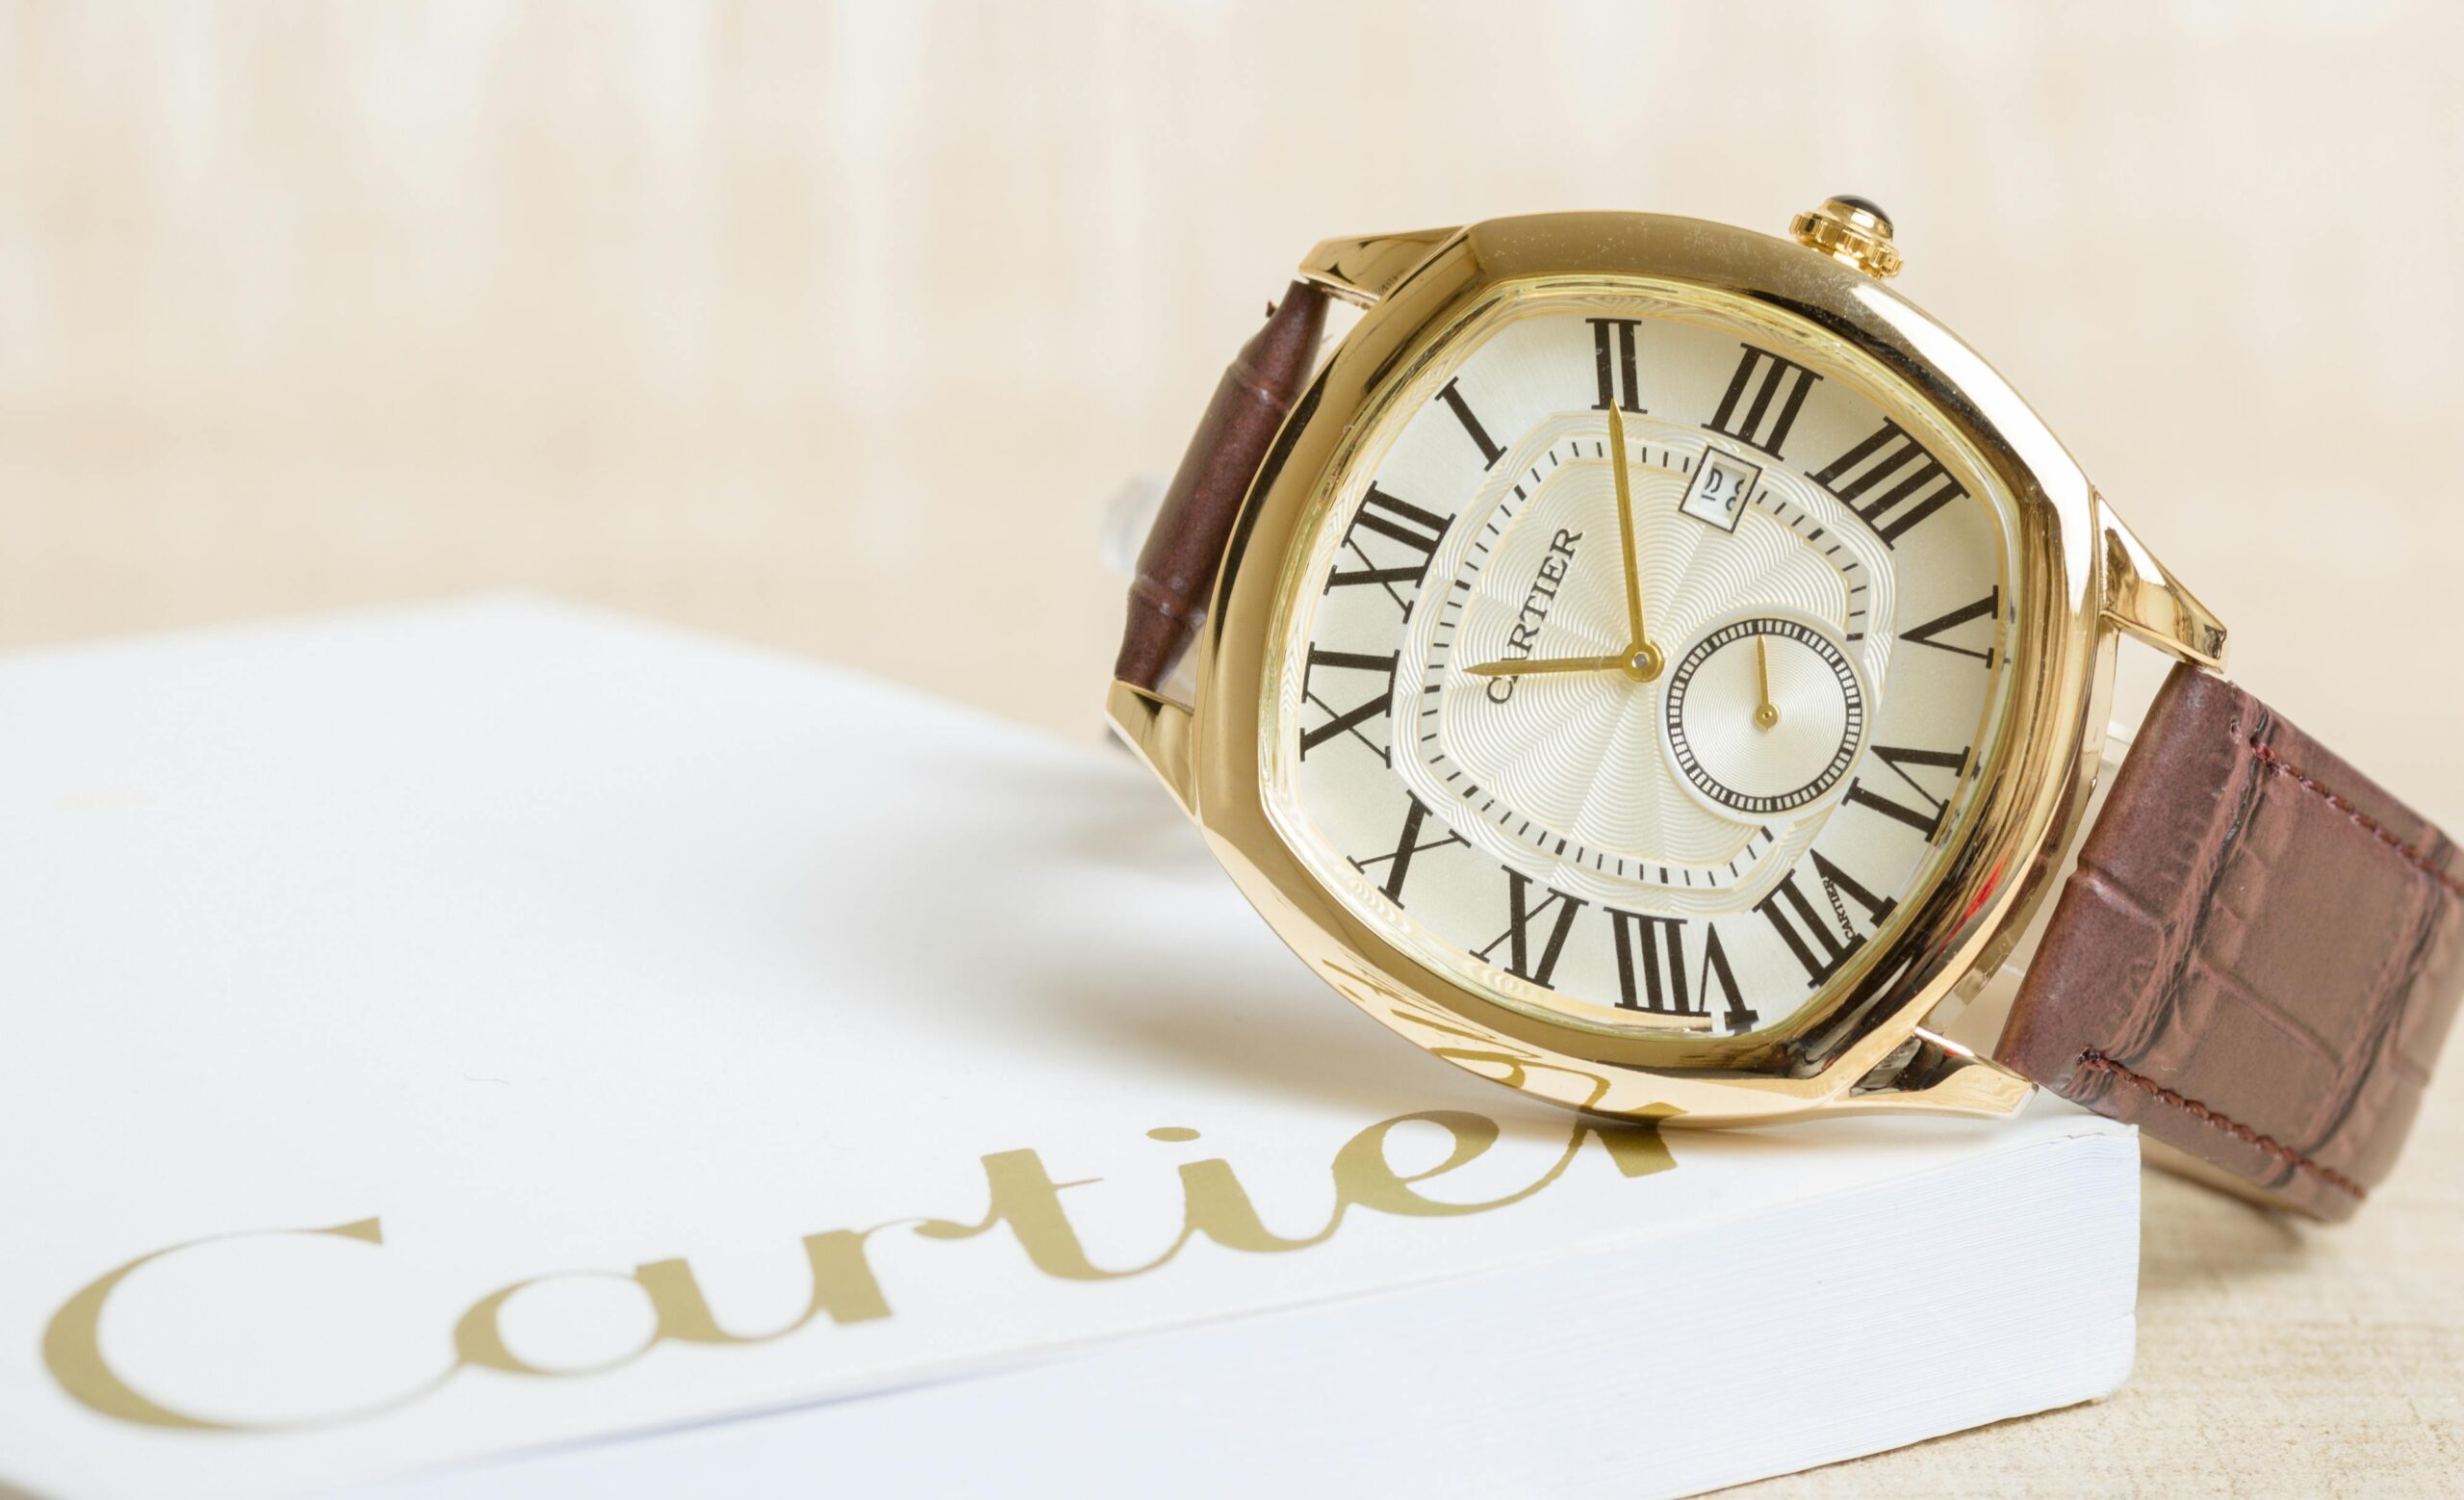 Luxury Watches For Women